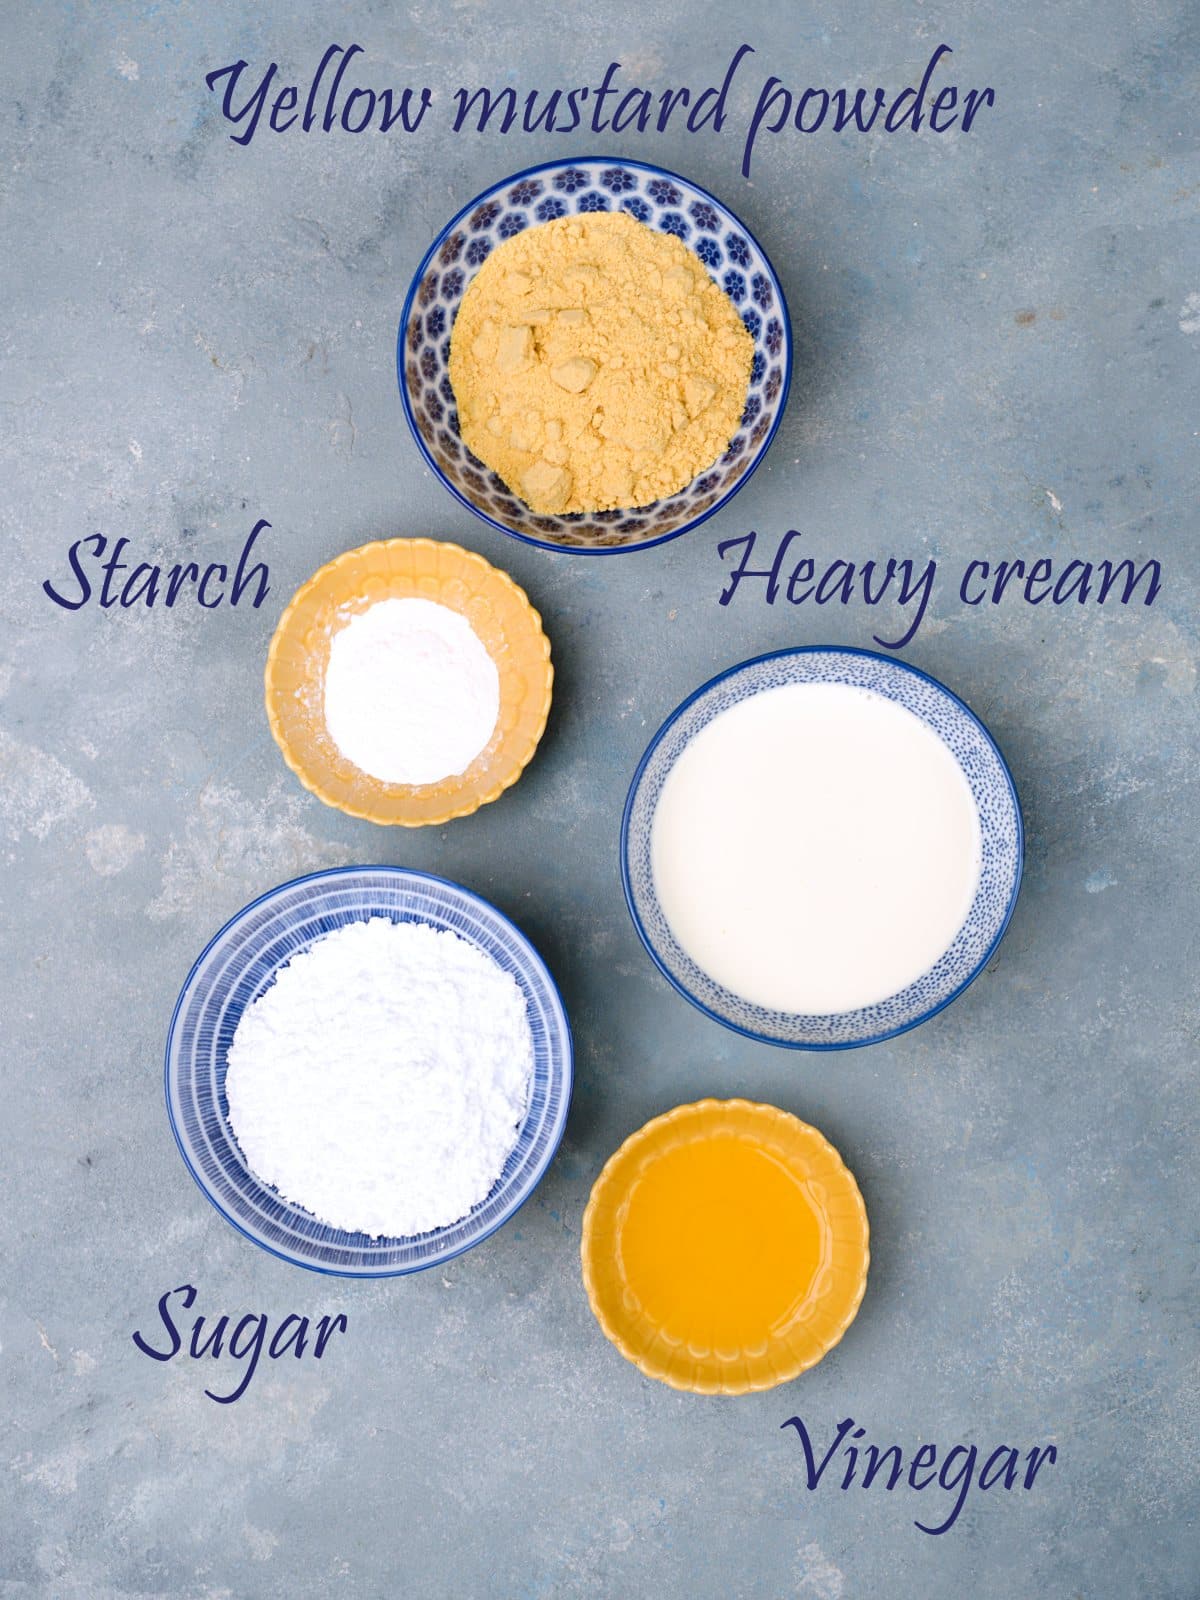 Ingredients for mustard laid on surface with labels; heavy cream, yellow mustard powder, starch, sugar and vinegar. 